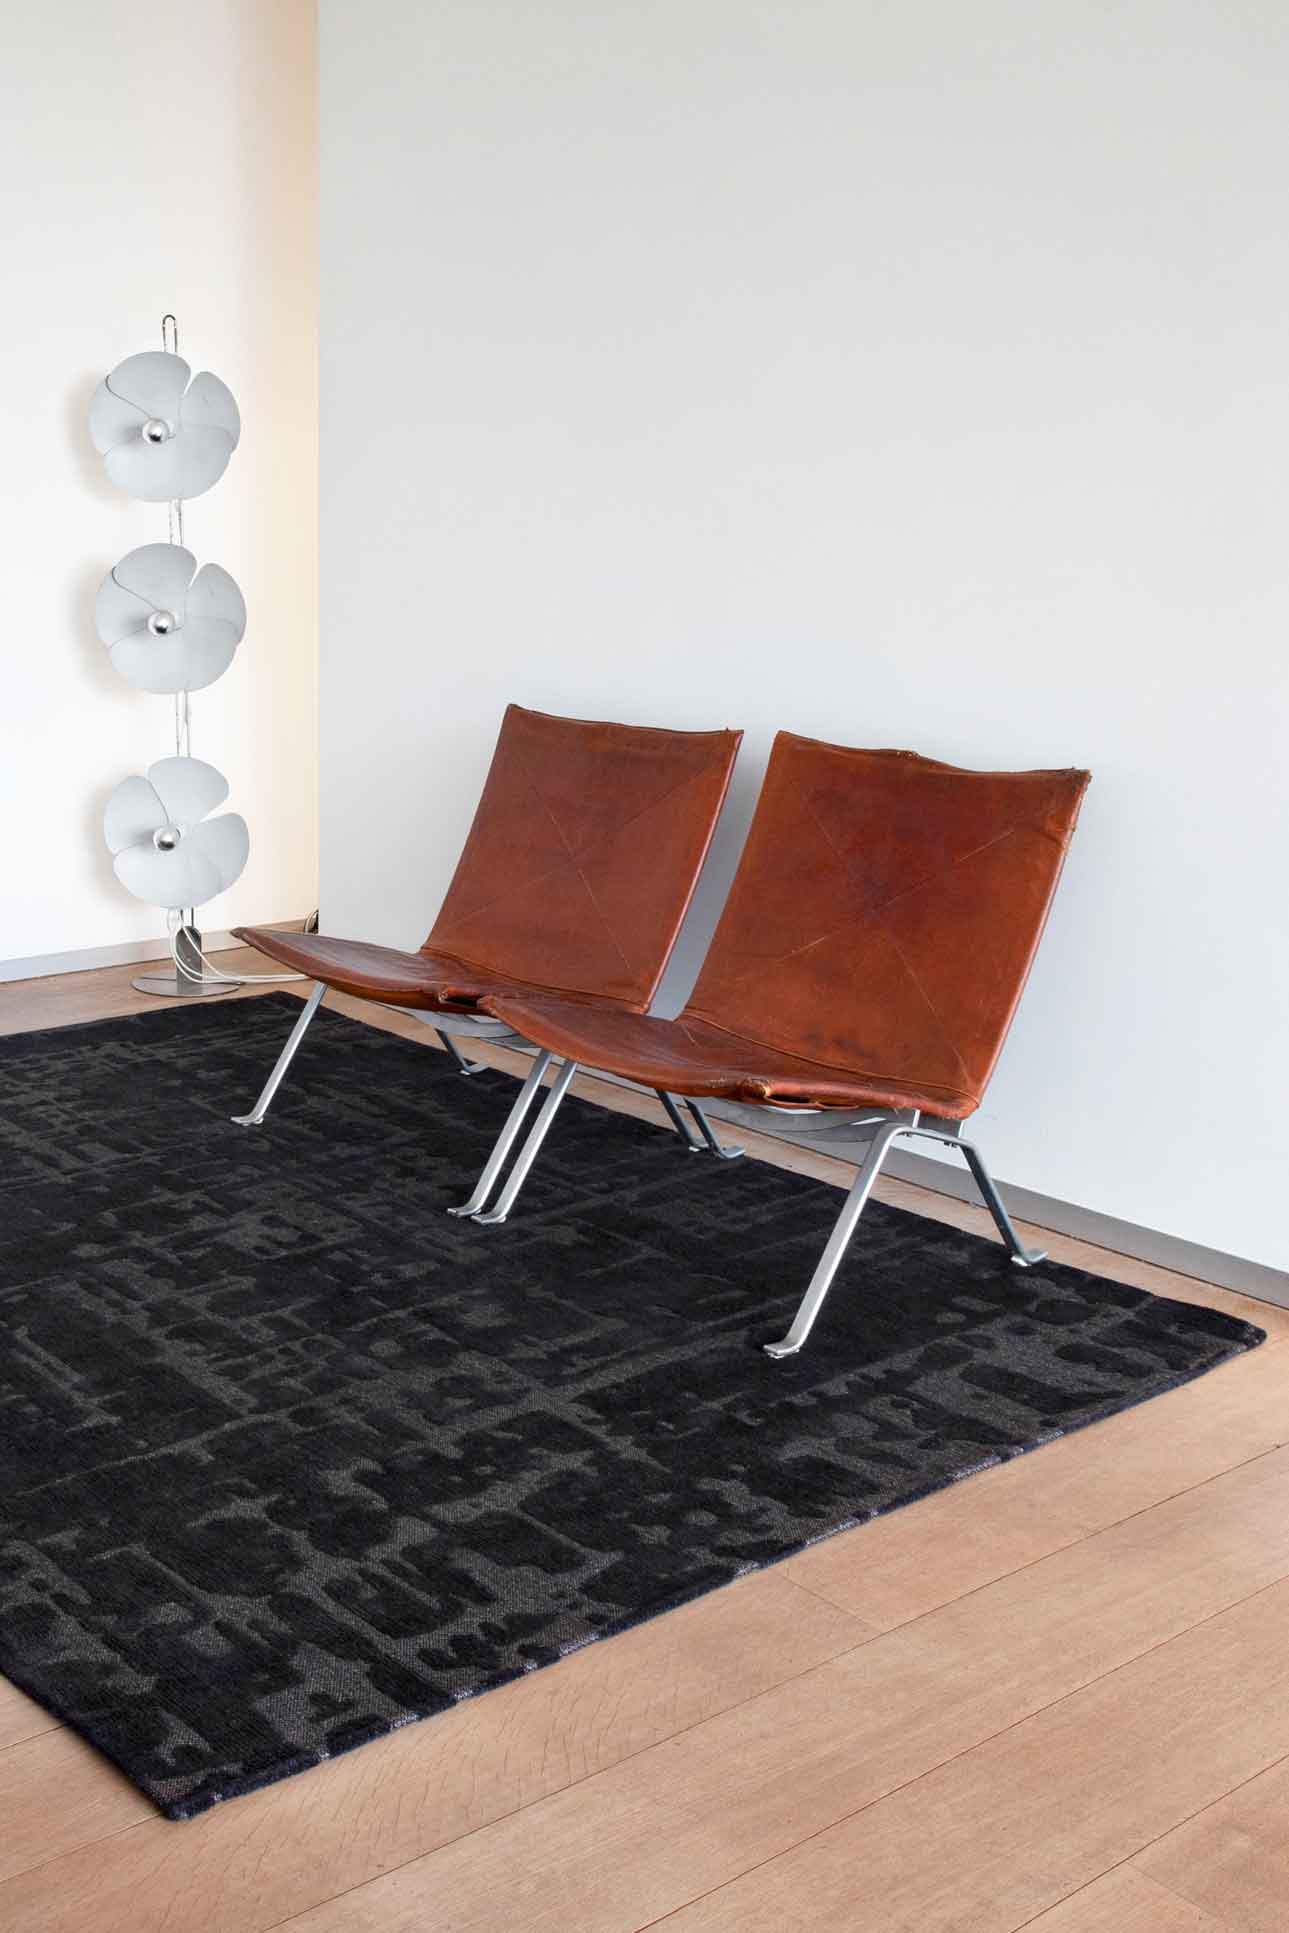 Abstract Black Belgian Rug ☞ Size: 4' 7" x 6' 7" (140 x 200 cm)